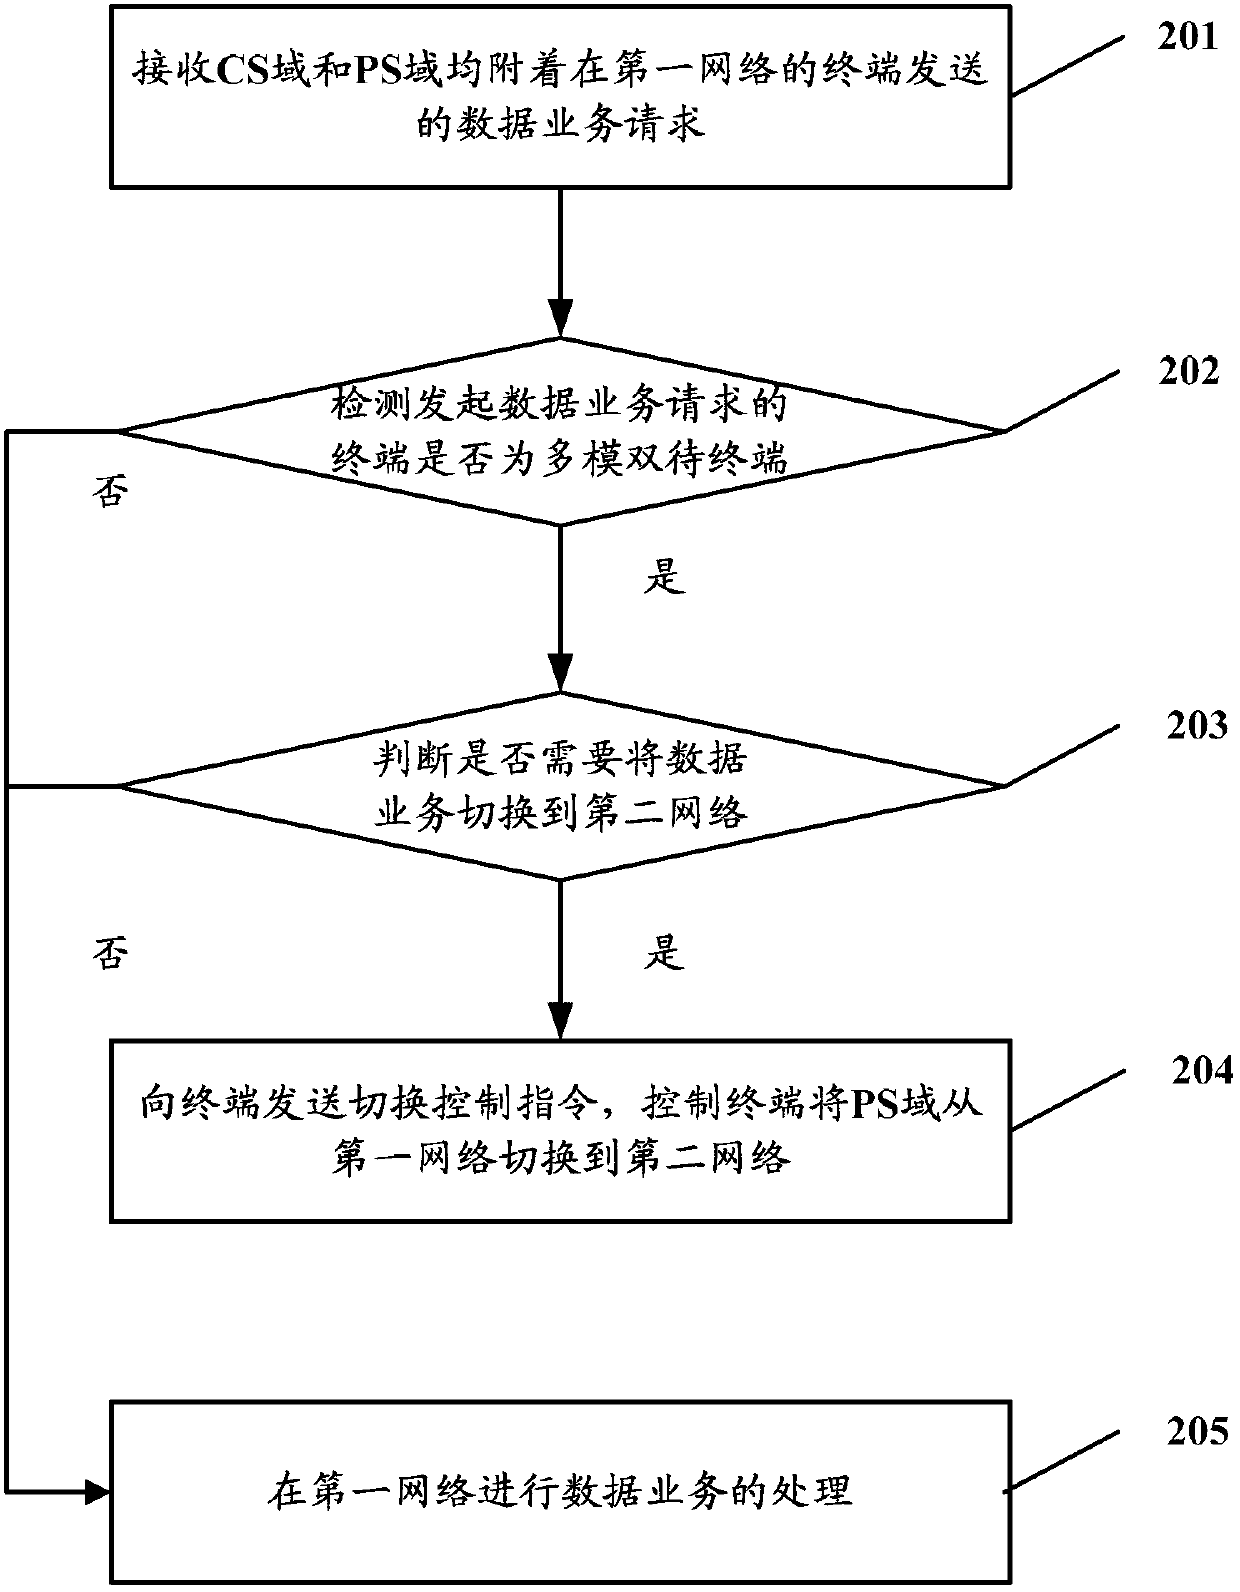 Wireless communication method and base station controller